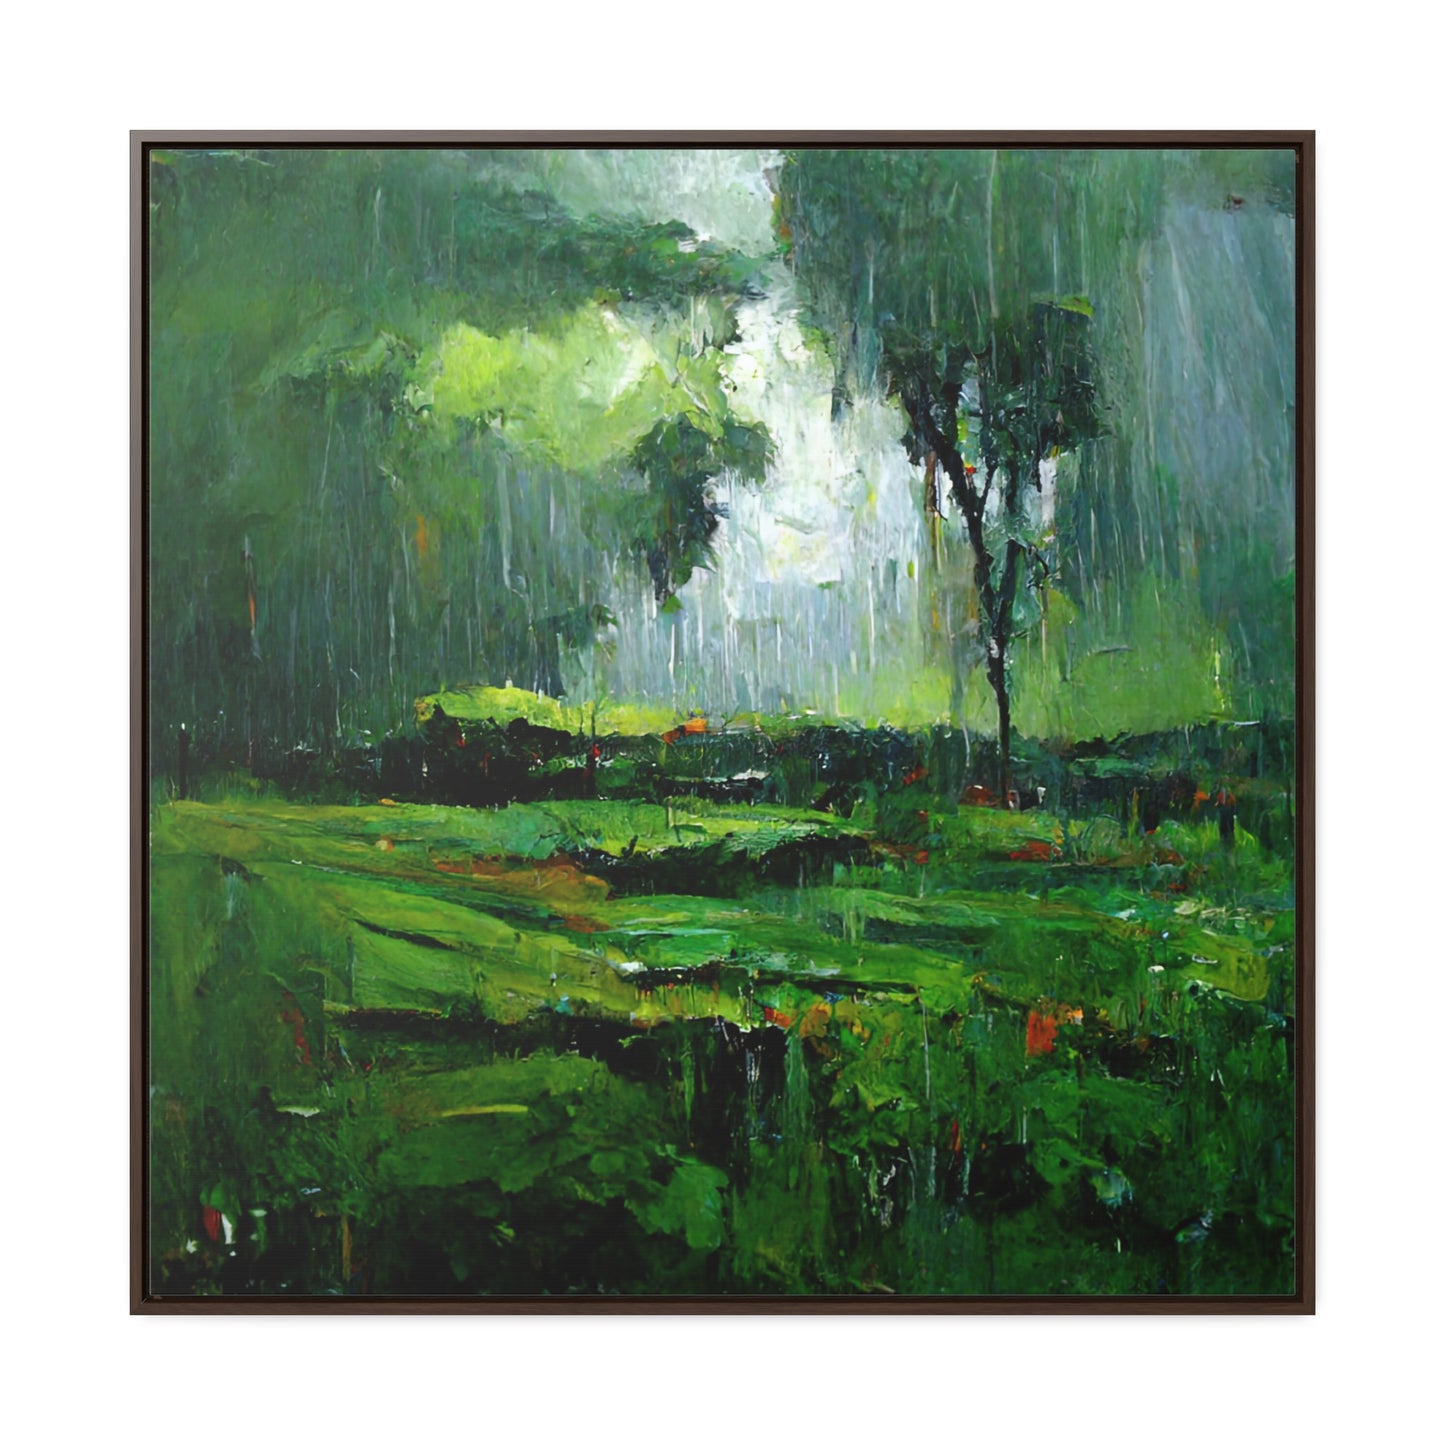 To the Rainy Land, Valentinii, Gallery Canvas Wraps, Square Frame